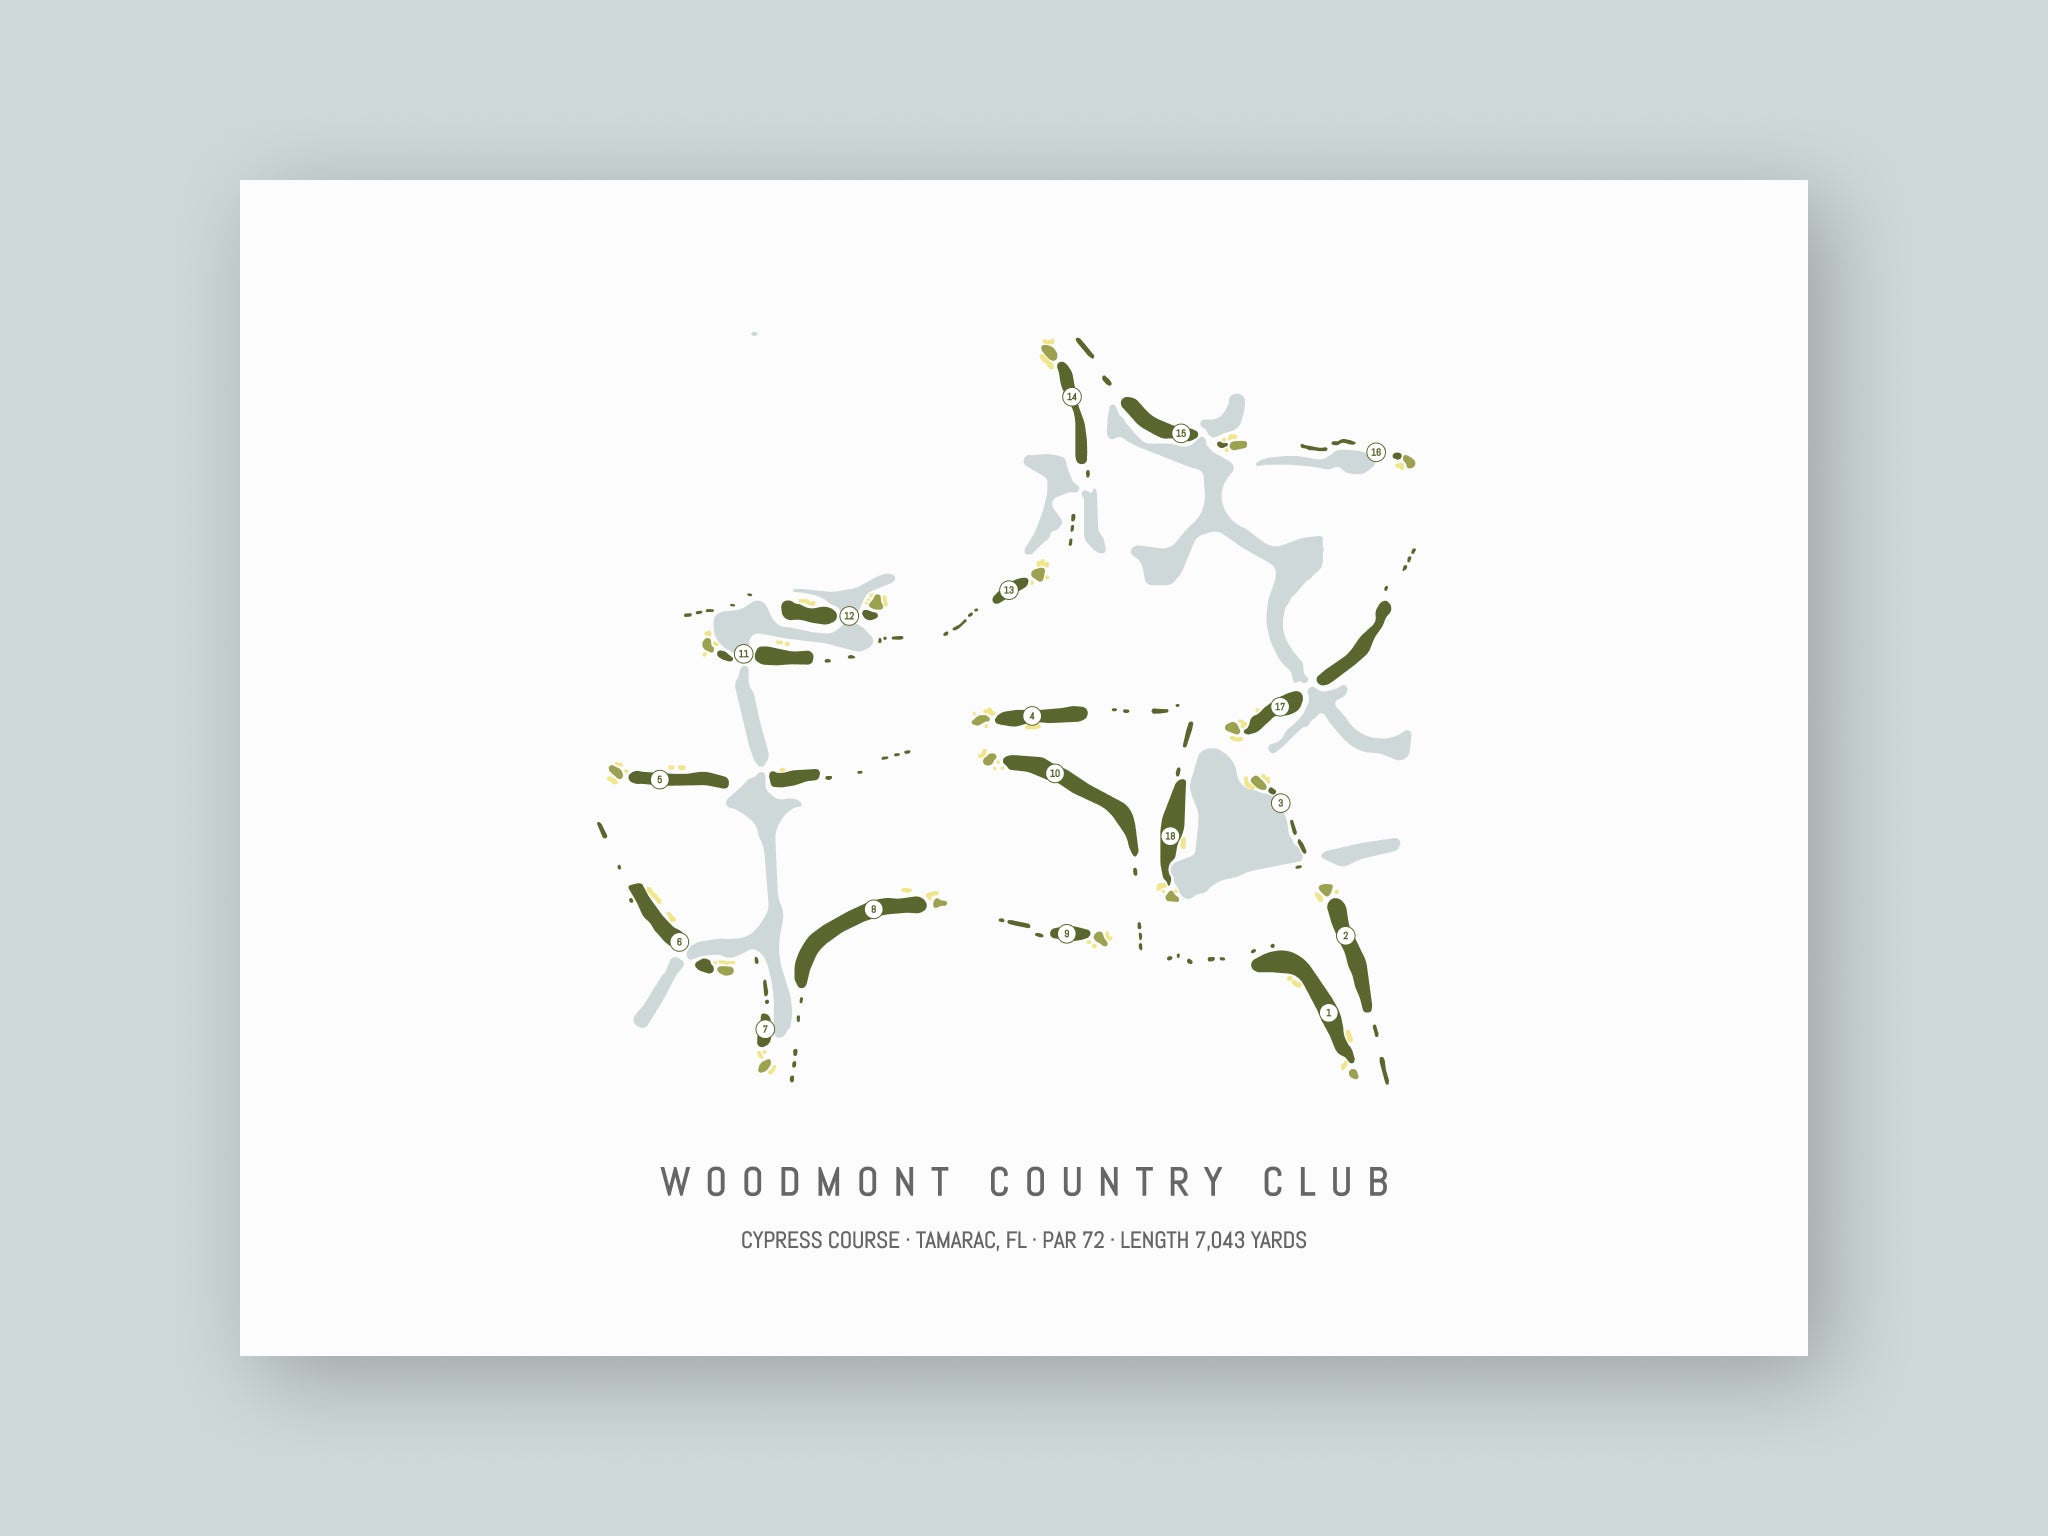 Woodmont-Country-Club-Cypress-Course-FL--Unframed-24x18-With-Hole-Numbers